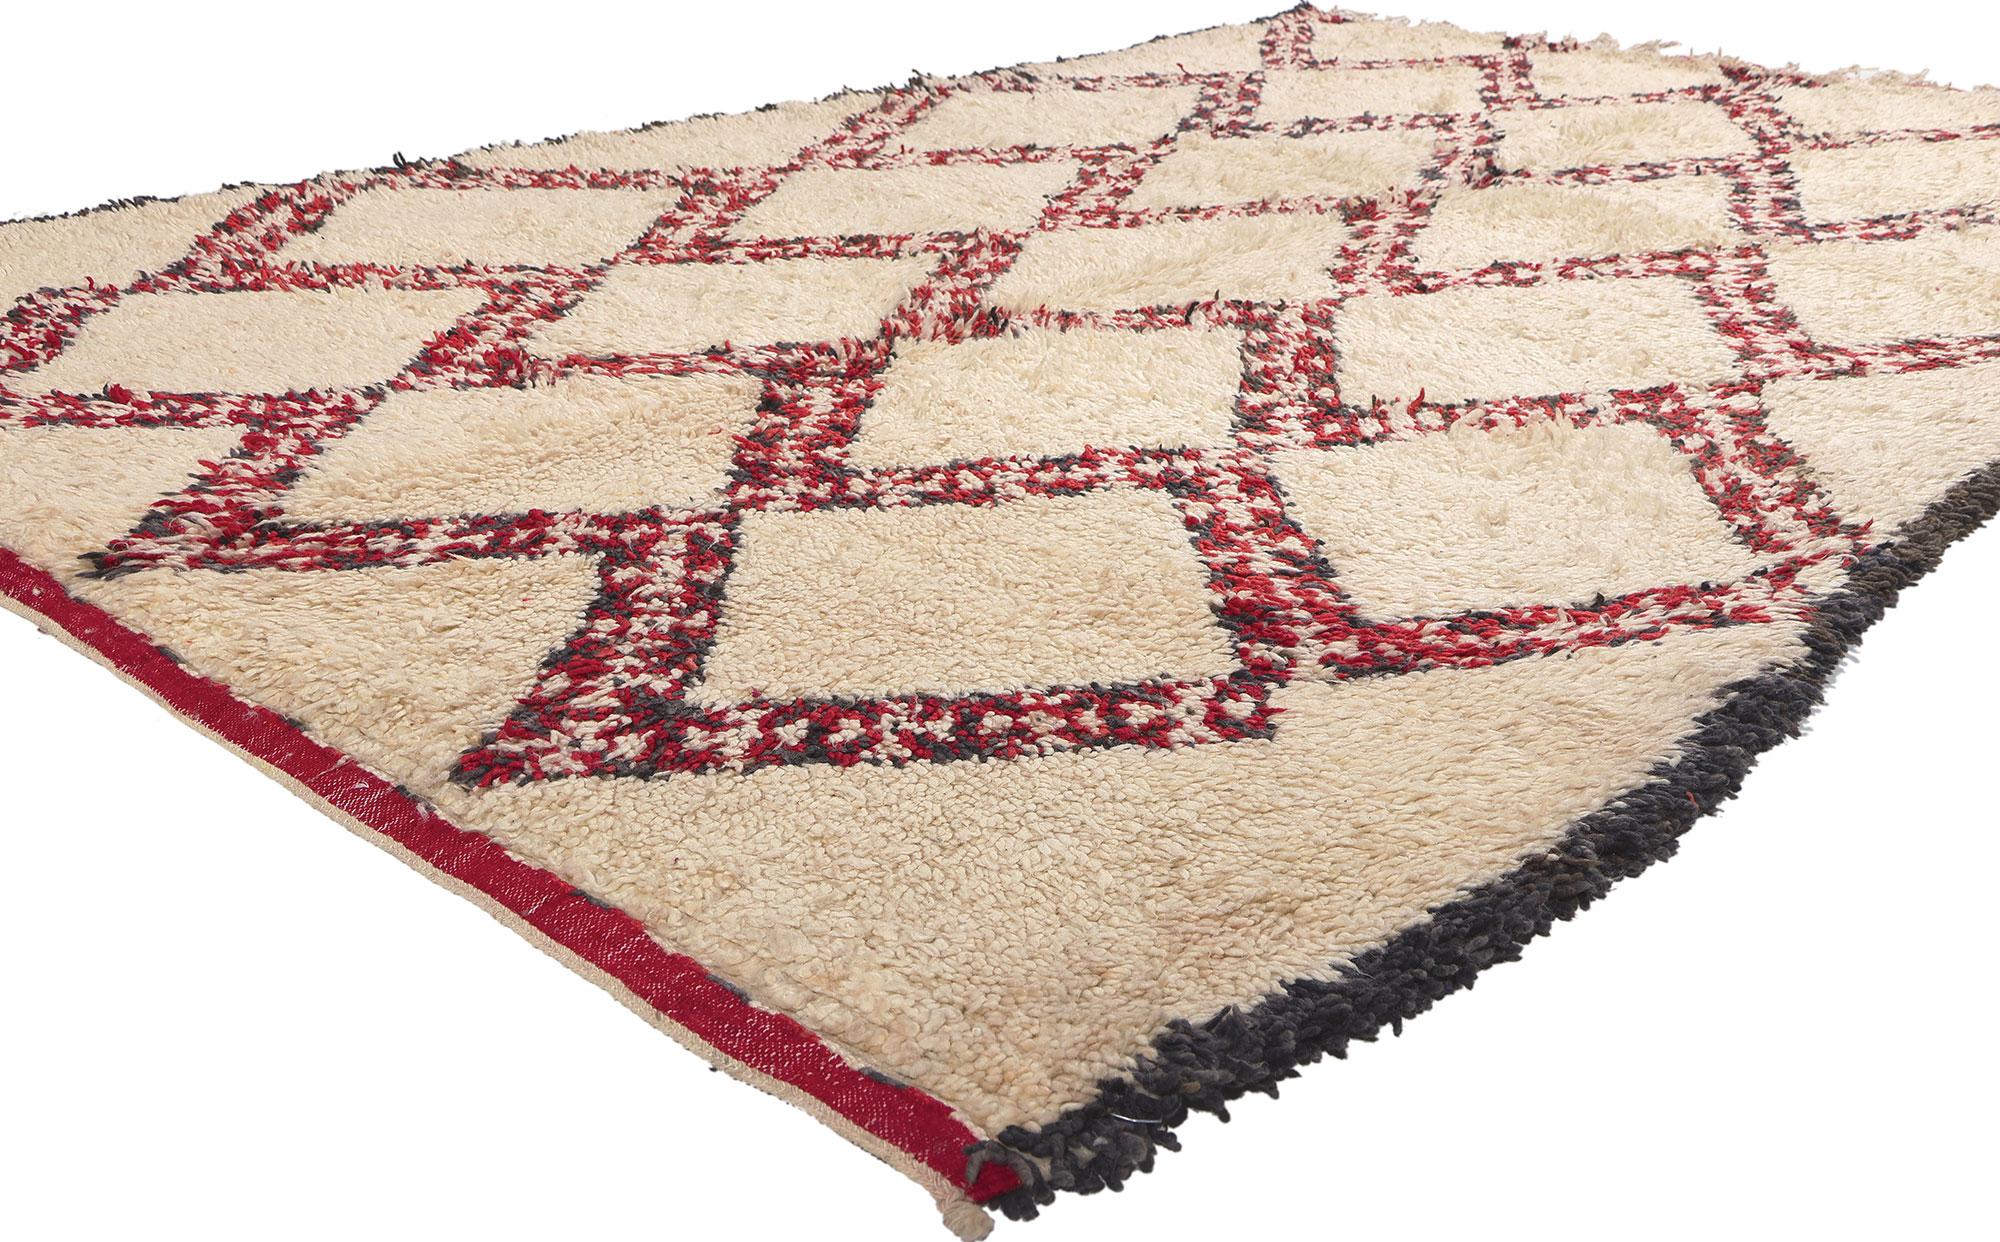 20291 Vintage Moroccan Beni Ourain Rug, 05'09 x 09'11. This vintage Moroccan rug hails from the Beni Ourain tribe, an integral part of the broader Berber ethnic group in Morocco. Meticulously crafted from natural, undyed sheep's wool, these rugs are